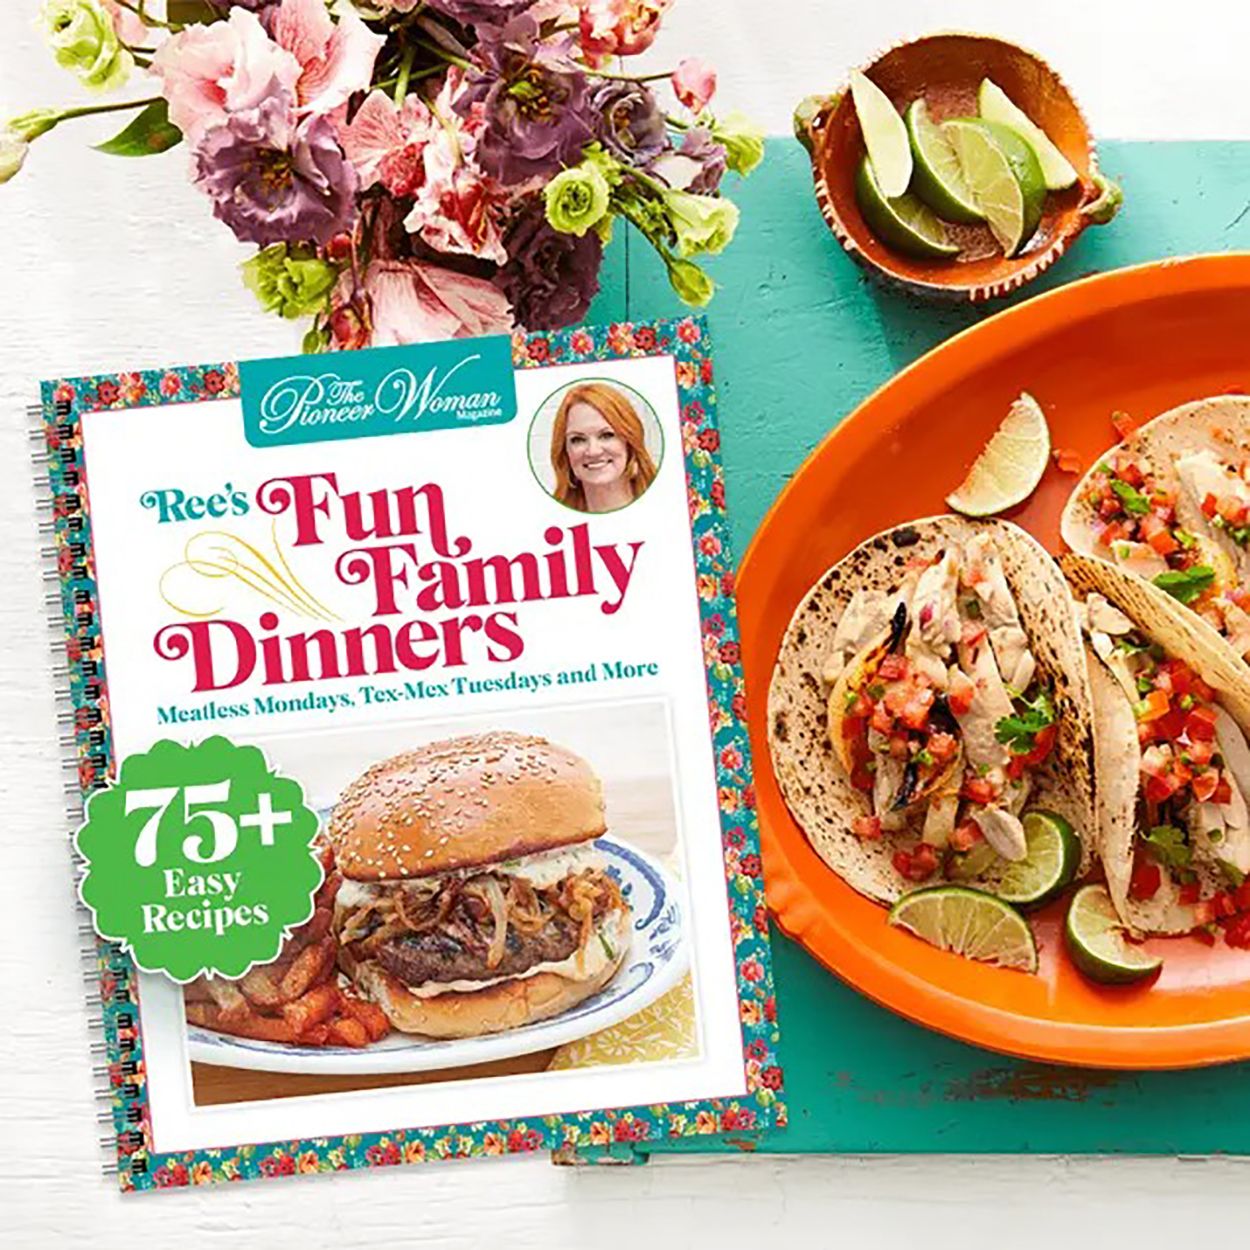 Where to Buy Ree Drummond's 'Ree's Fun Family Dinners' Cookbook